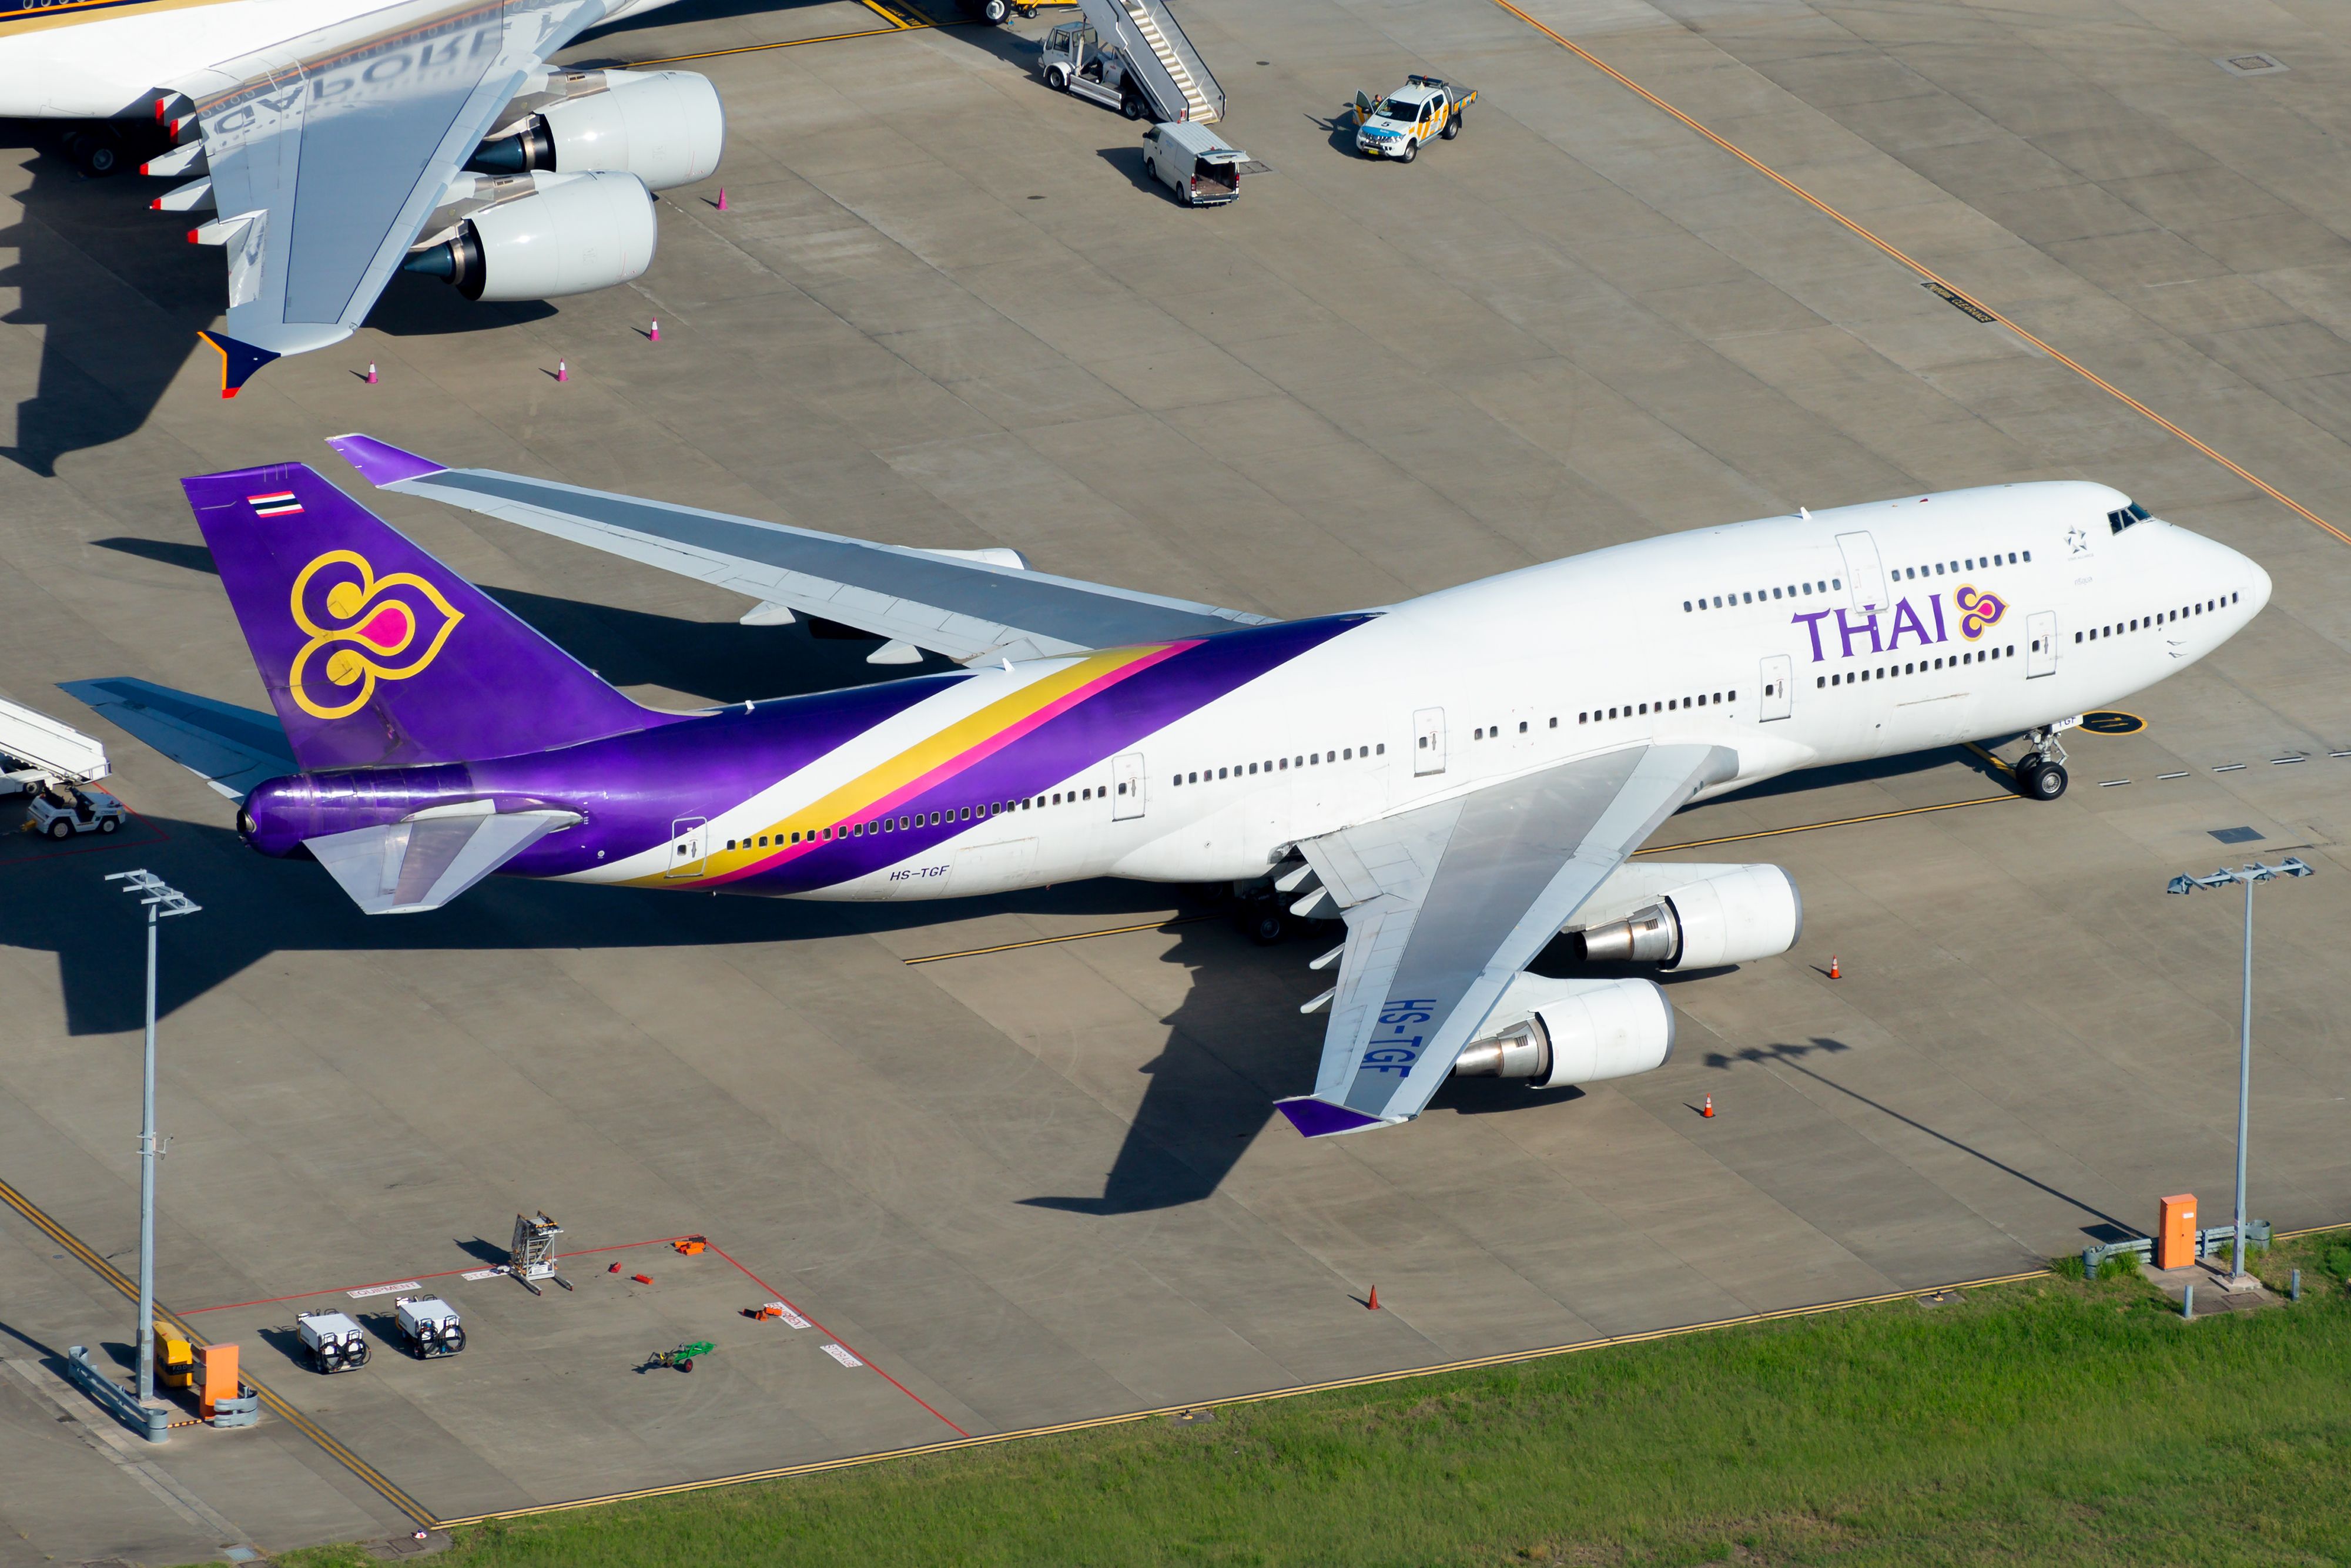 A Thai Airways Boeing 747 on the tarmac at Sydney Kingsford Smith International Airport